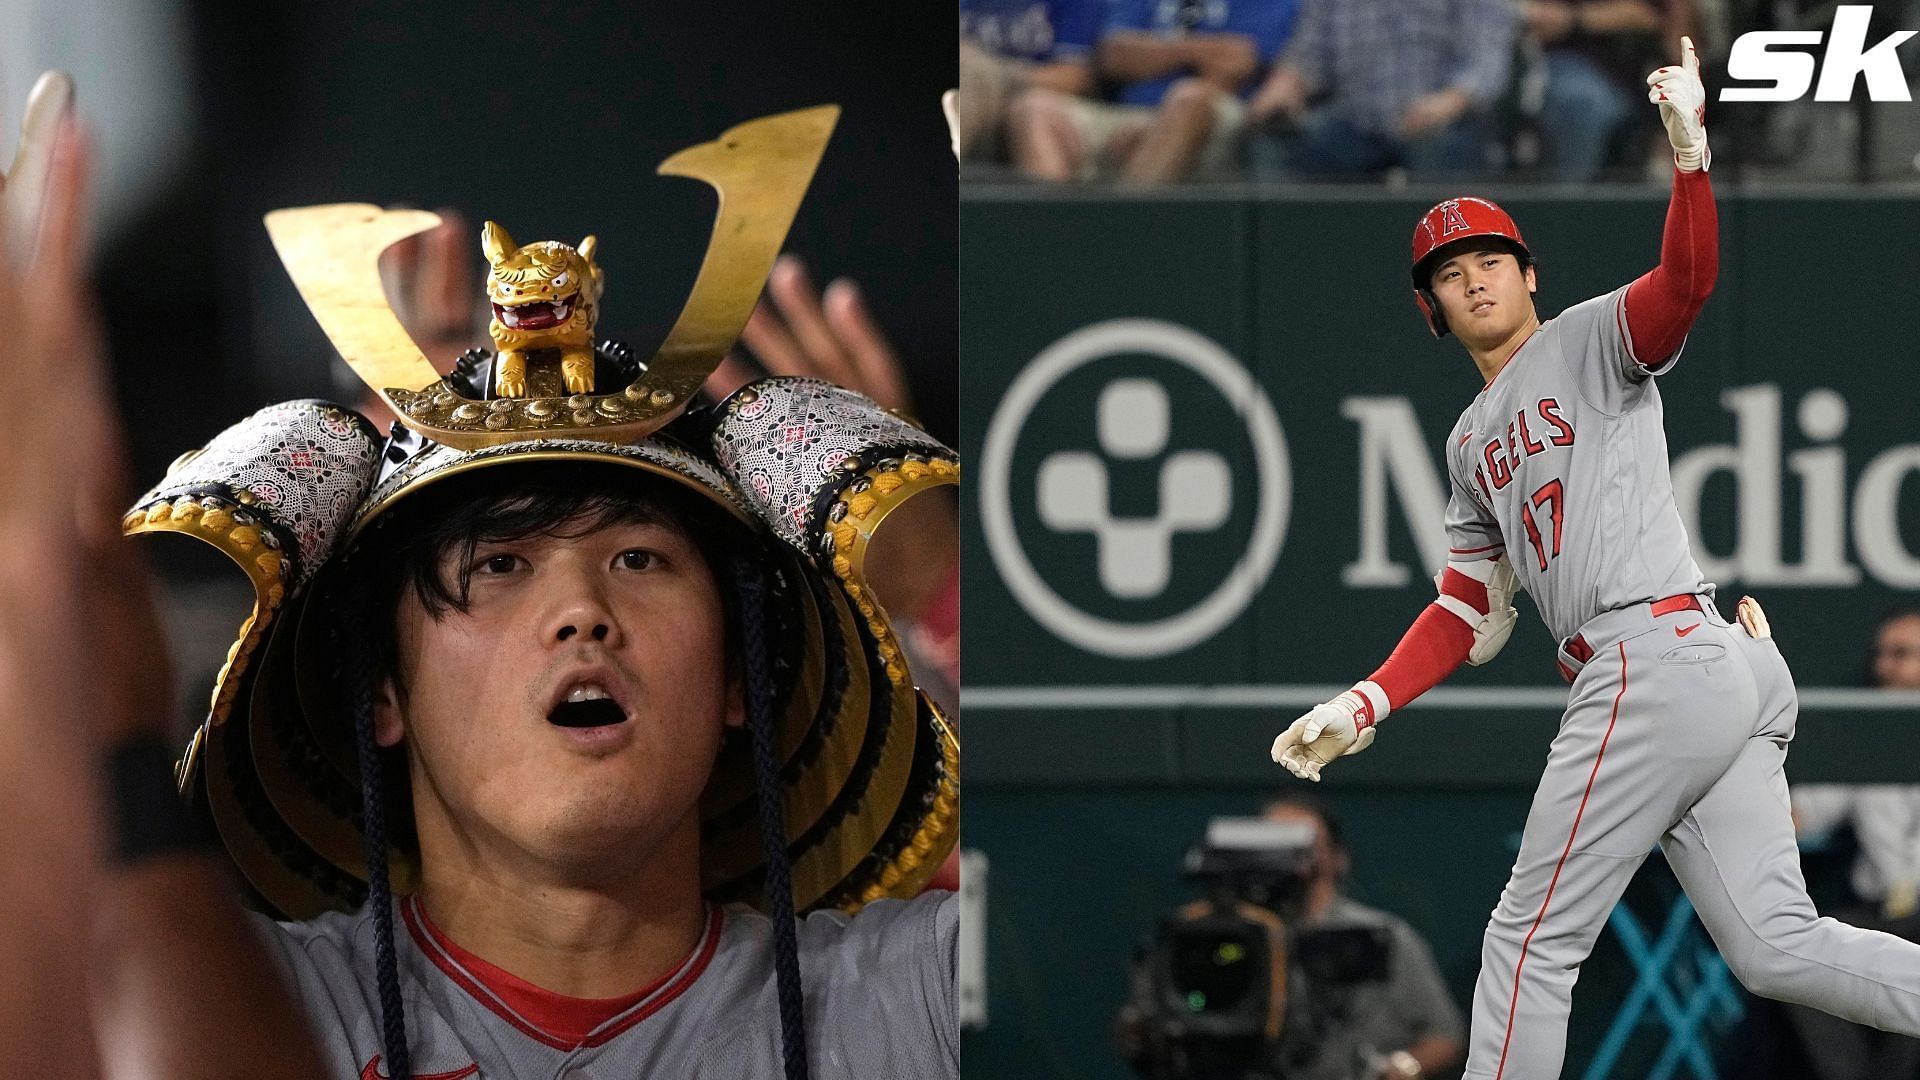 Shohei Ohtani has been on a tear for the Los Angeles Angels